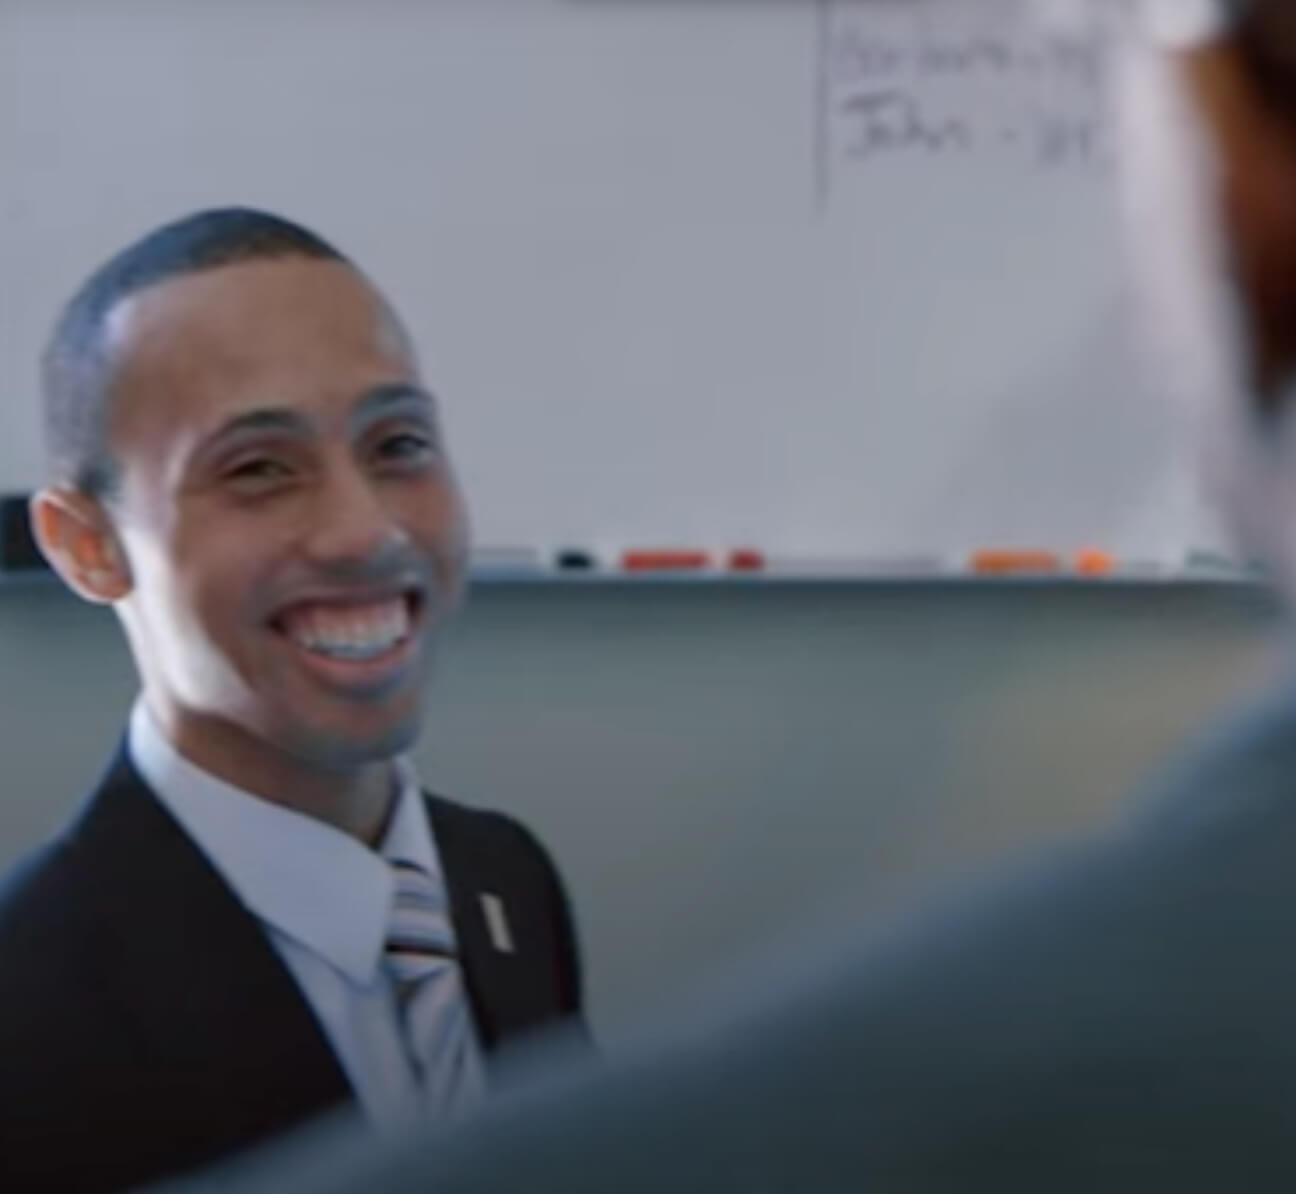 Male employee in suit is smiling